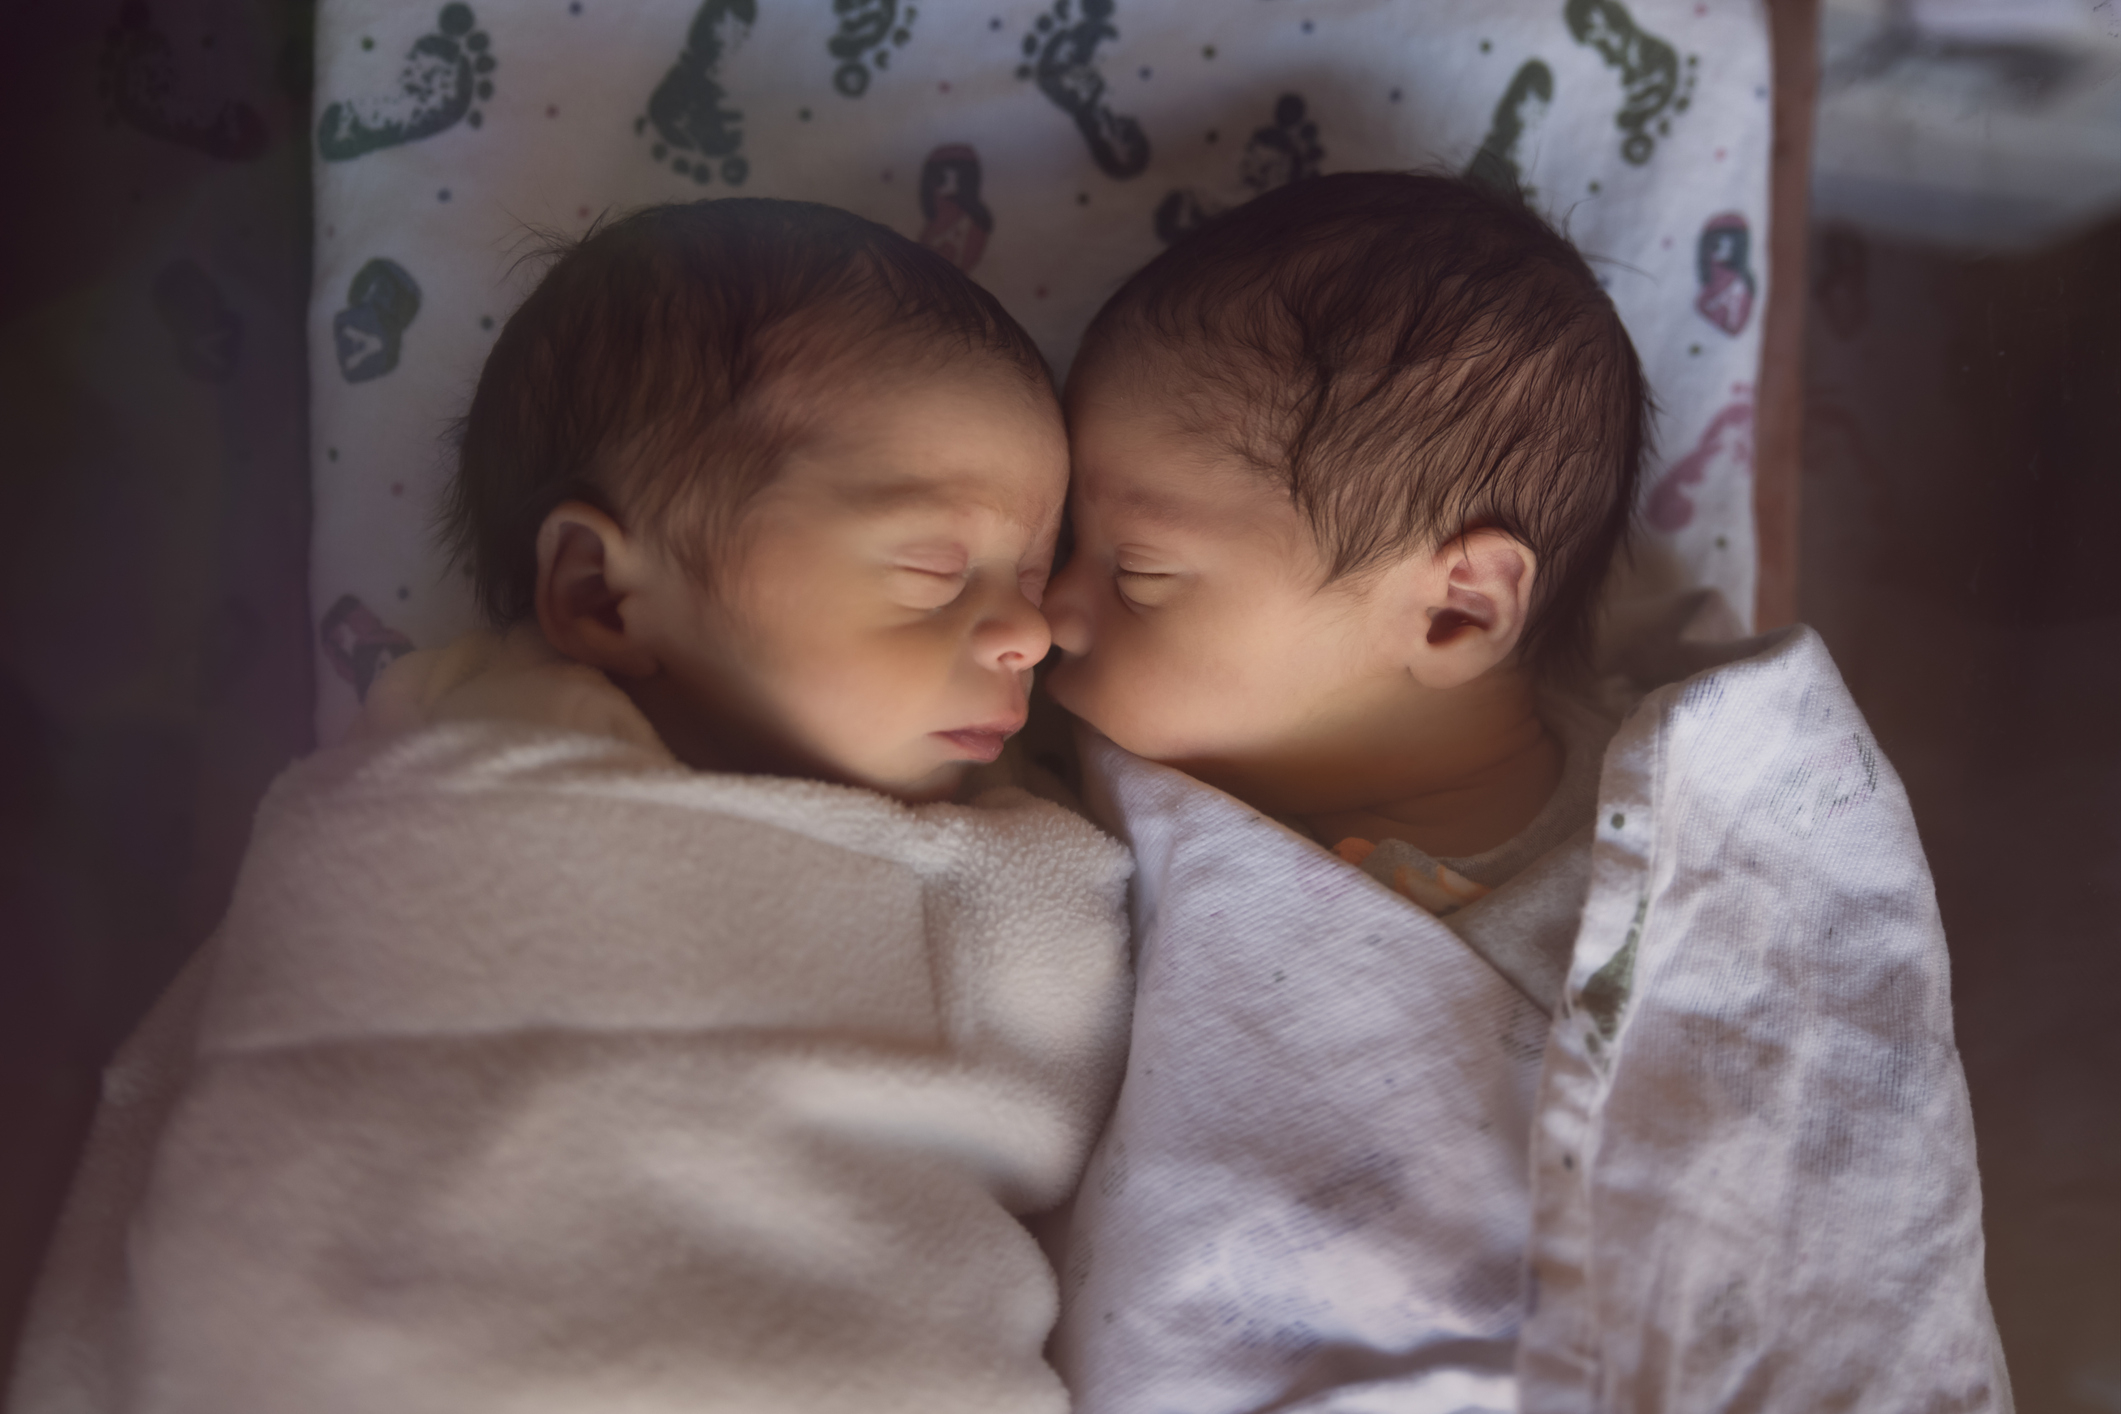 Newborn twins swaddled and sleeping side by side